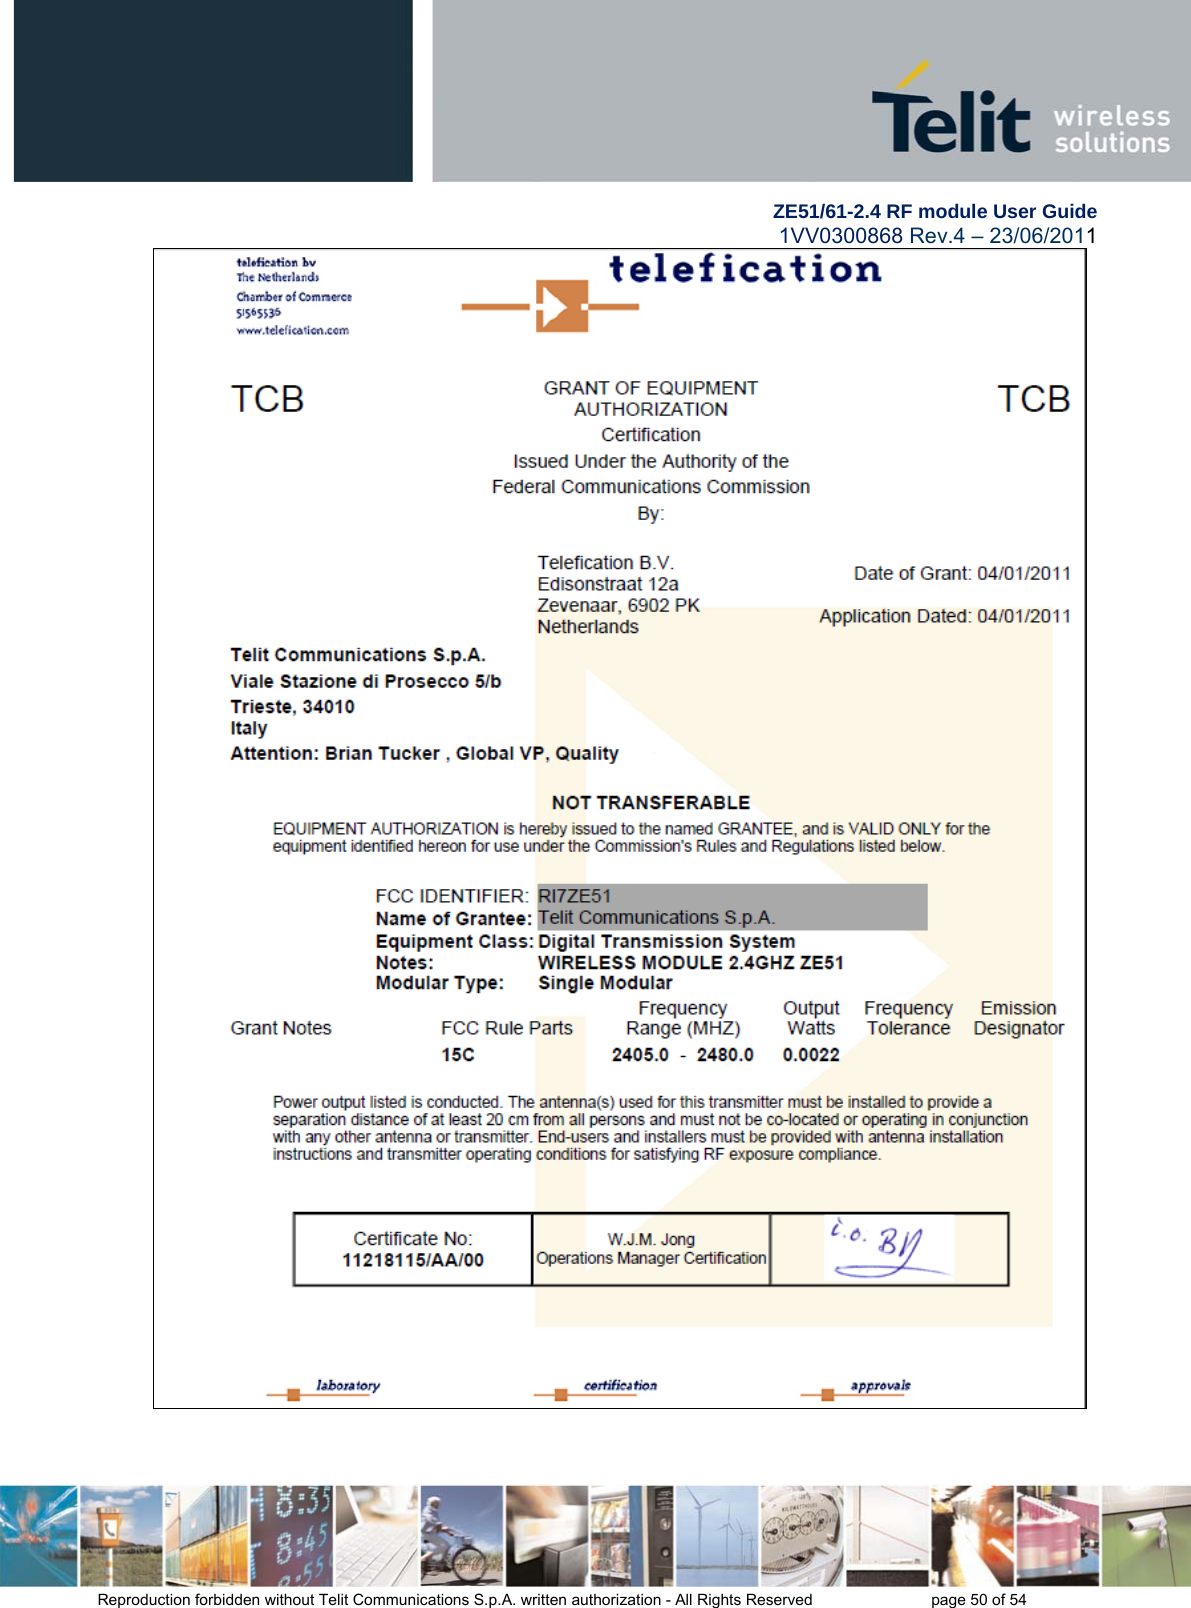         ZE51/61-2.4 RF module User Guide 1VV0300868 Rev.4 – 23/06/2011 Reproduction forbidden without Telit Communications S.p.A. written authorization - All Rights Reserved    page 50 of 54    